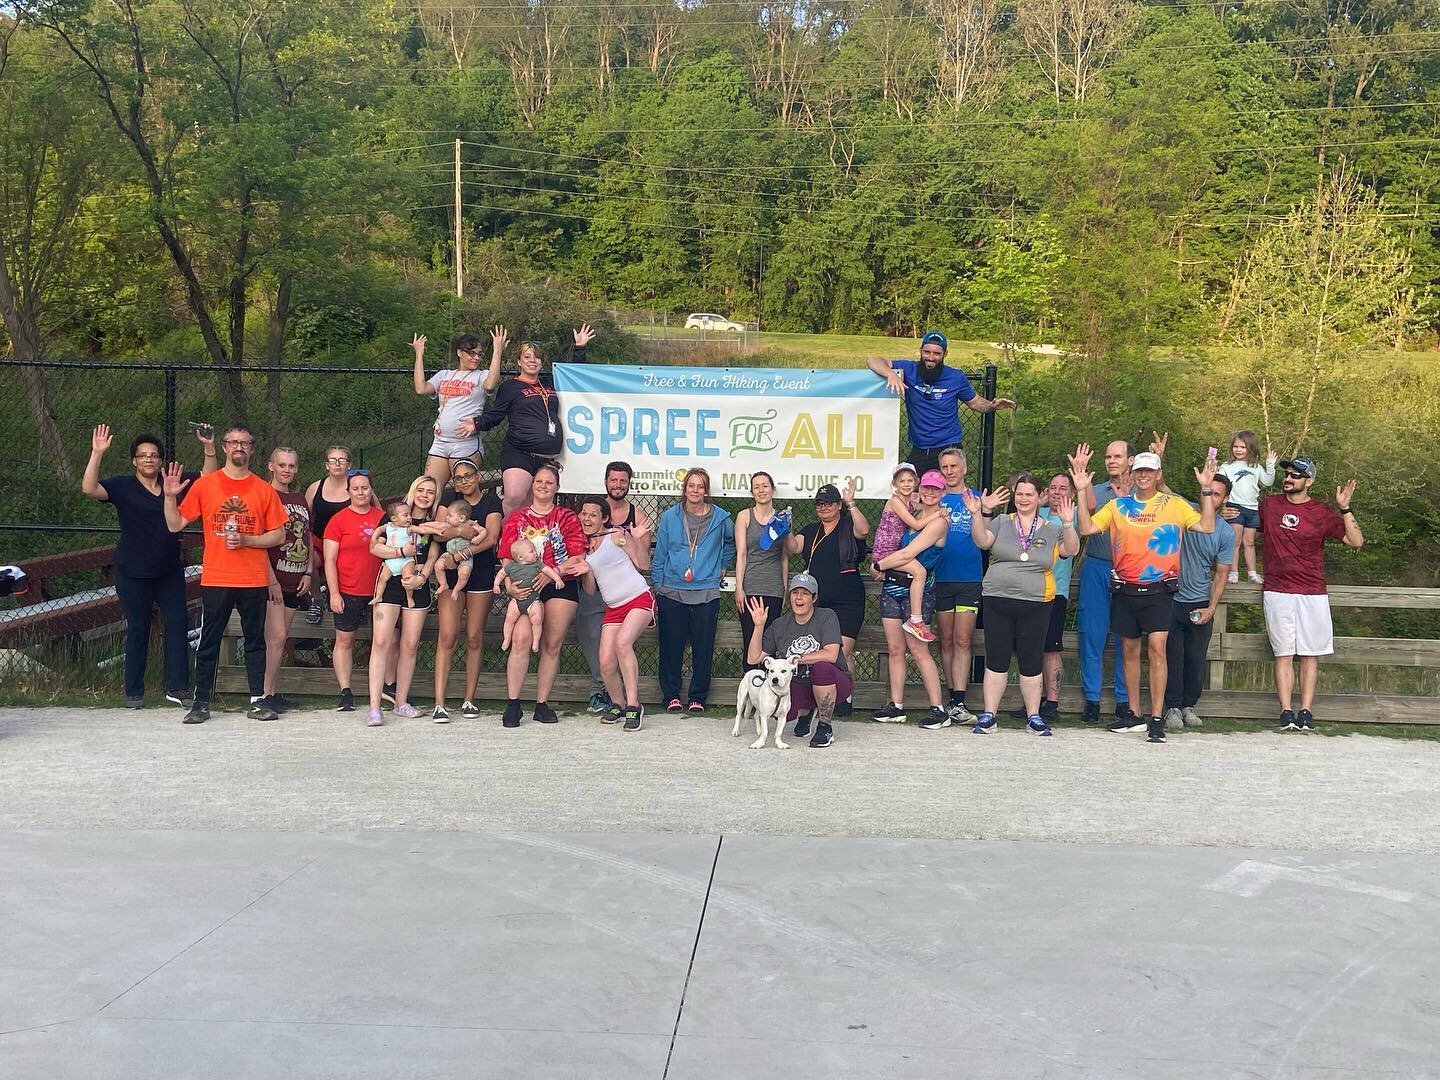 Biggest group of the year in Akron tonight. Weather was perfect, we had two Motivator Award winners and 8 earned their shoes. Just think how many will come out when @bernie.rochford.3 brings cookies. Thank you @r2uracing for donating shirts and @flee